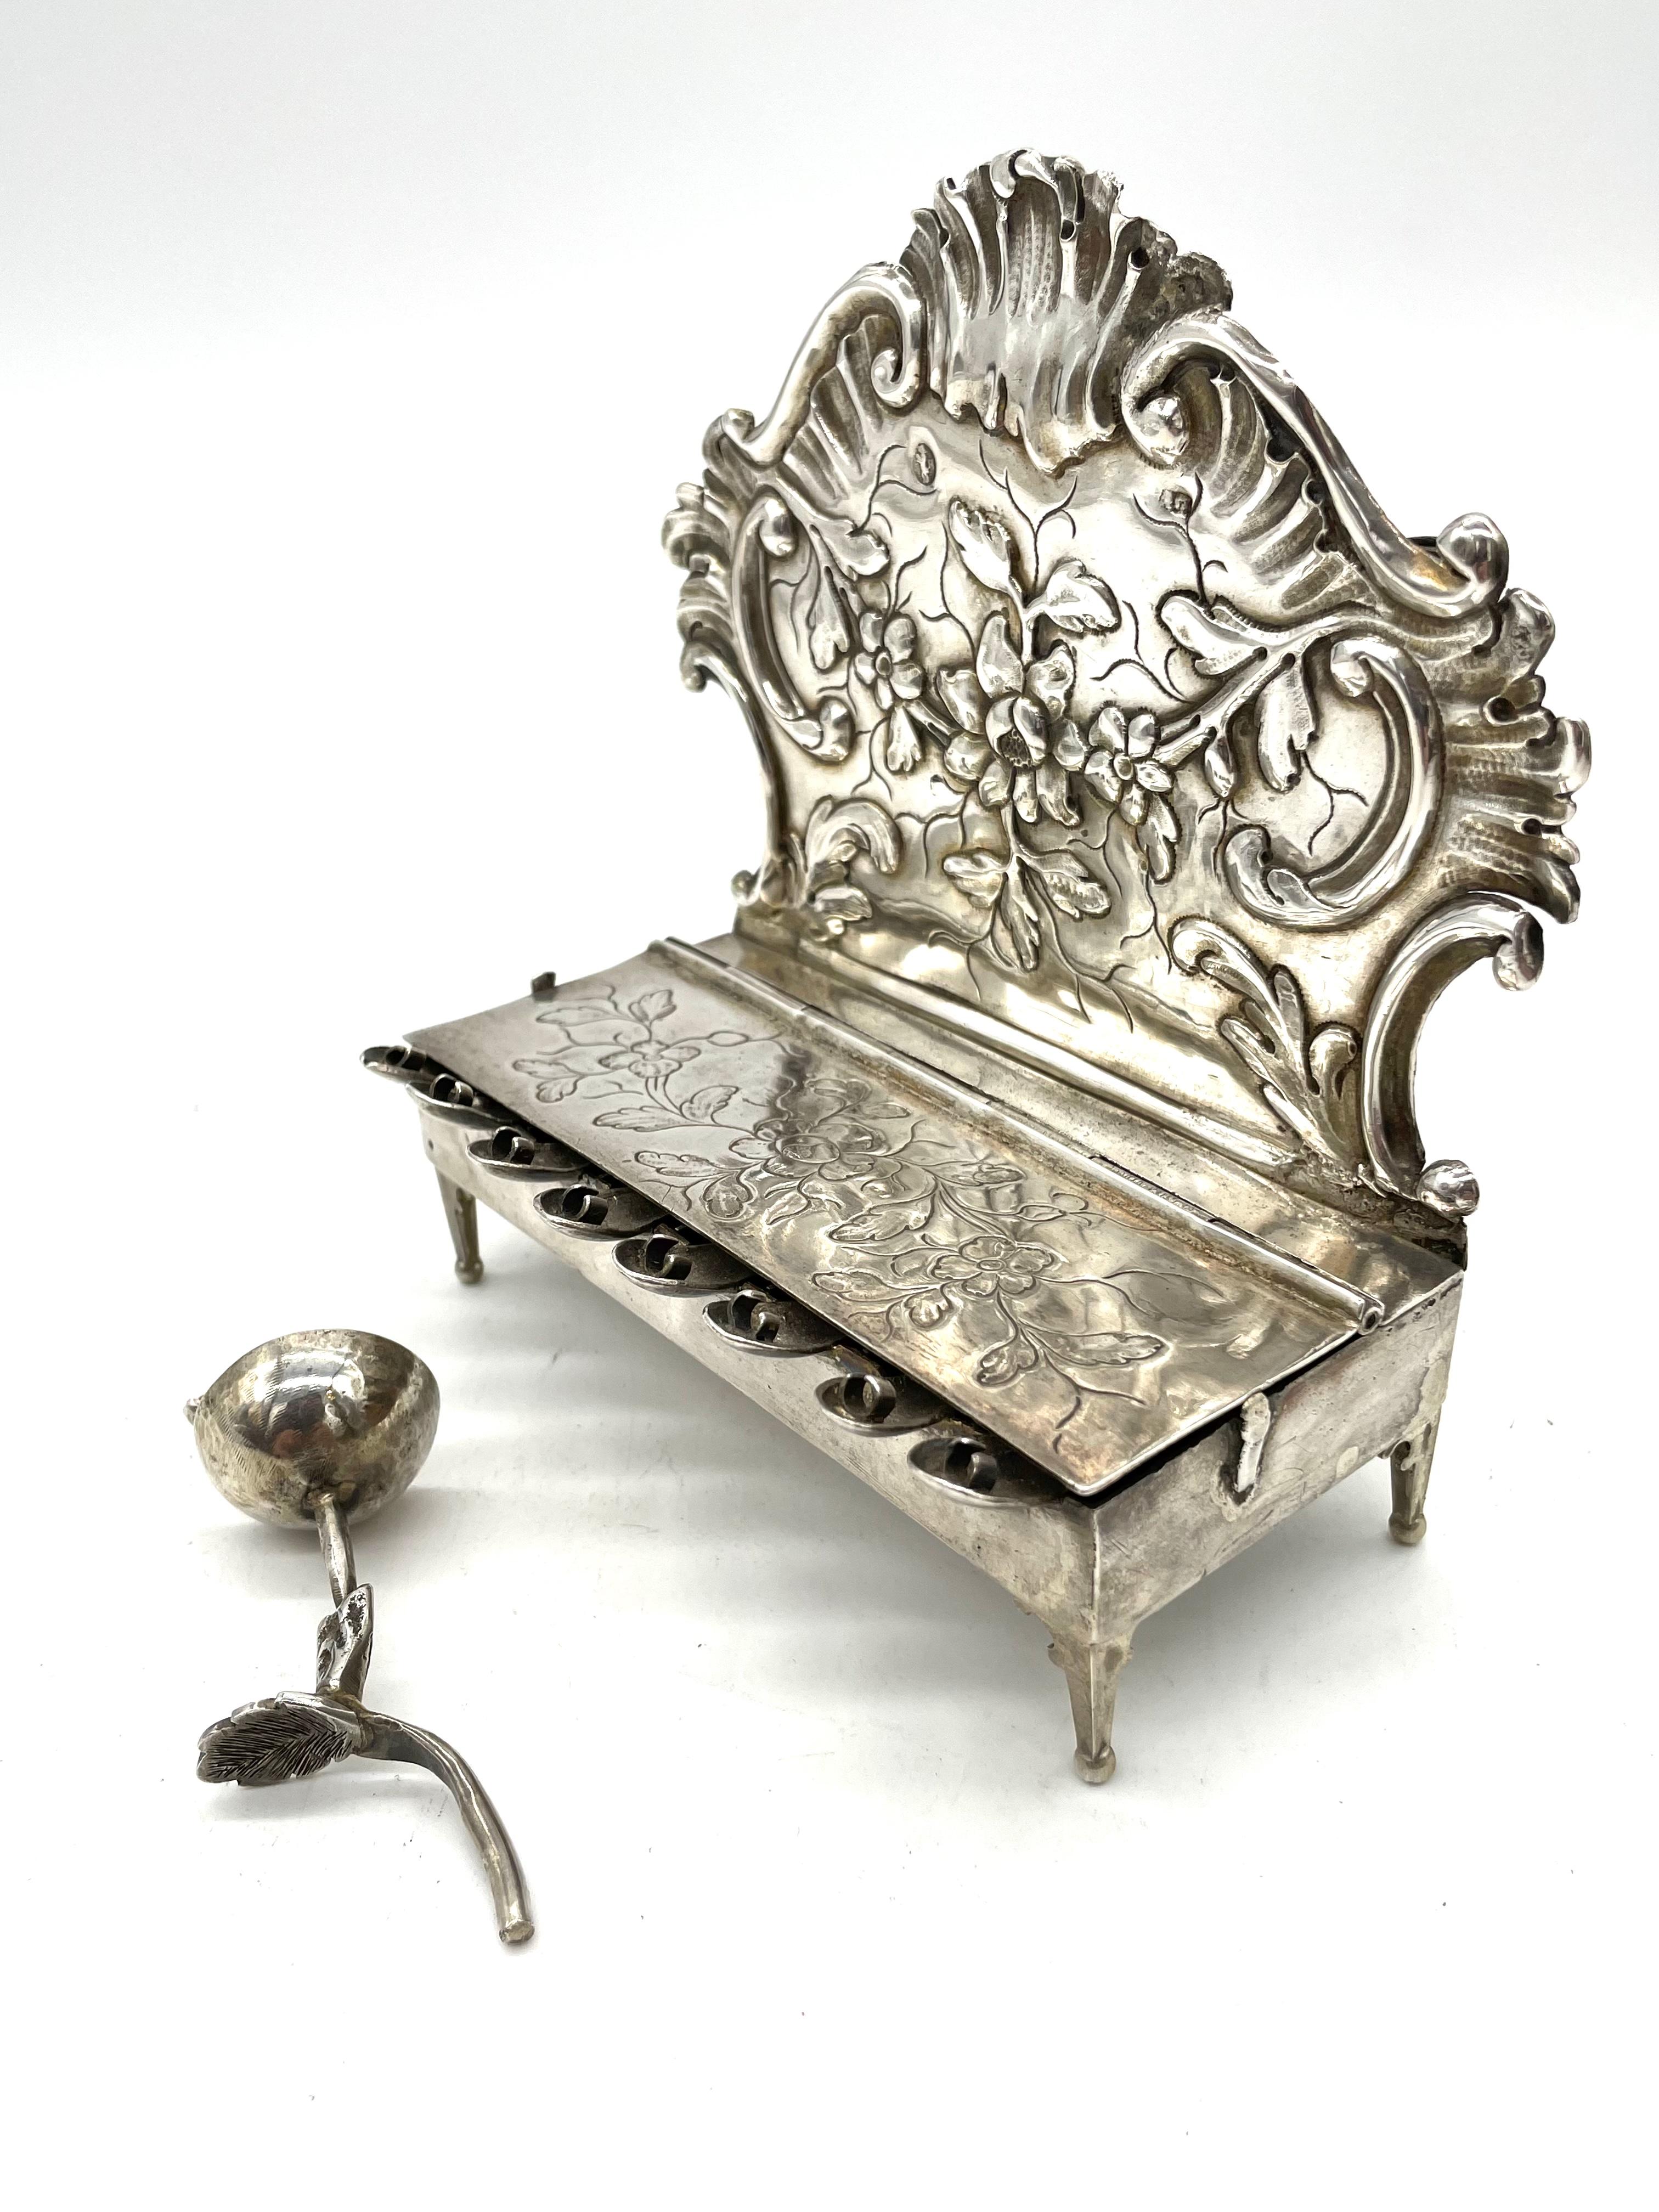 A late 18th century German silver Hanukkah lamp. This magnificent Hanukkah lamp has a shaped rococo cartouche backplate, chased with a swag of flowers and arched edges. The rectangle box containing the eight candle holders stands on four bracket